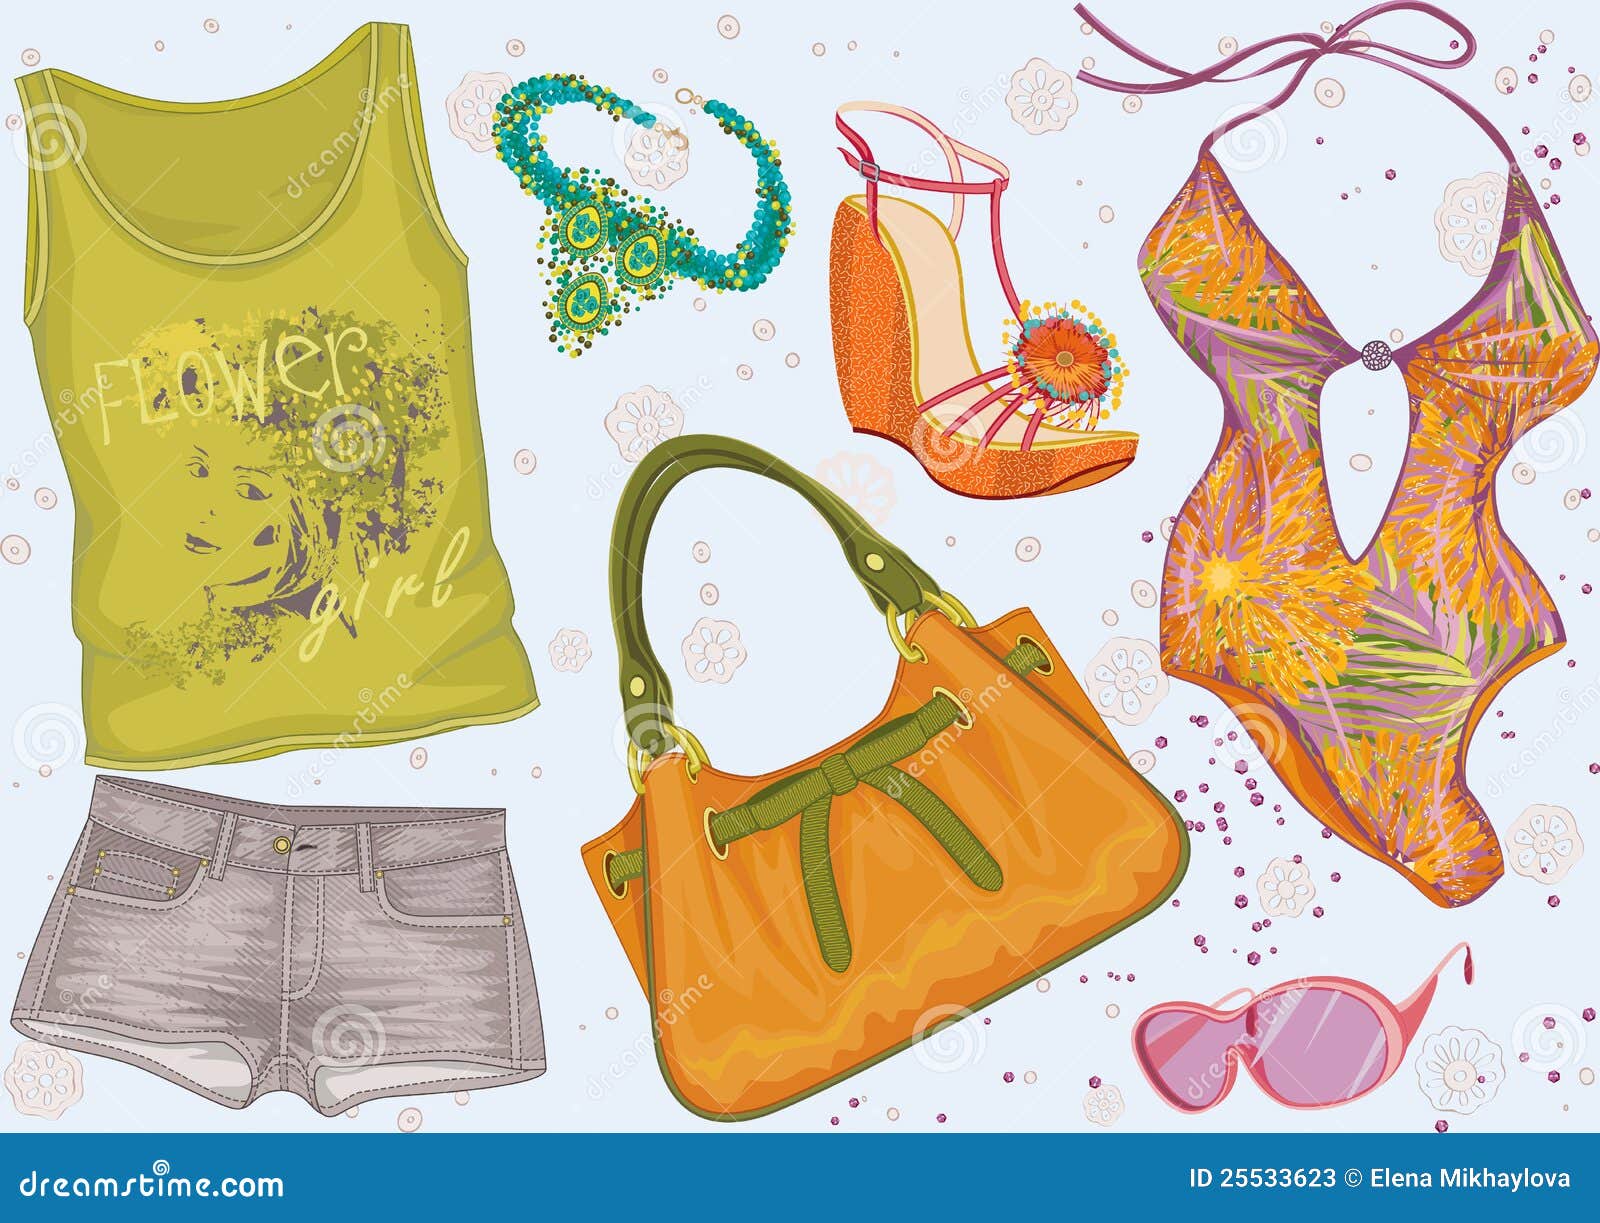 clipart of summer clothes - photo #19